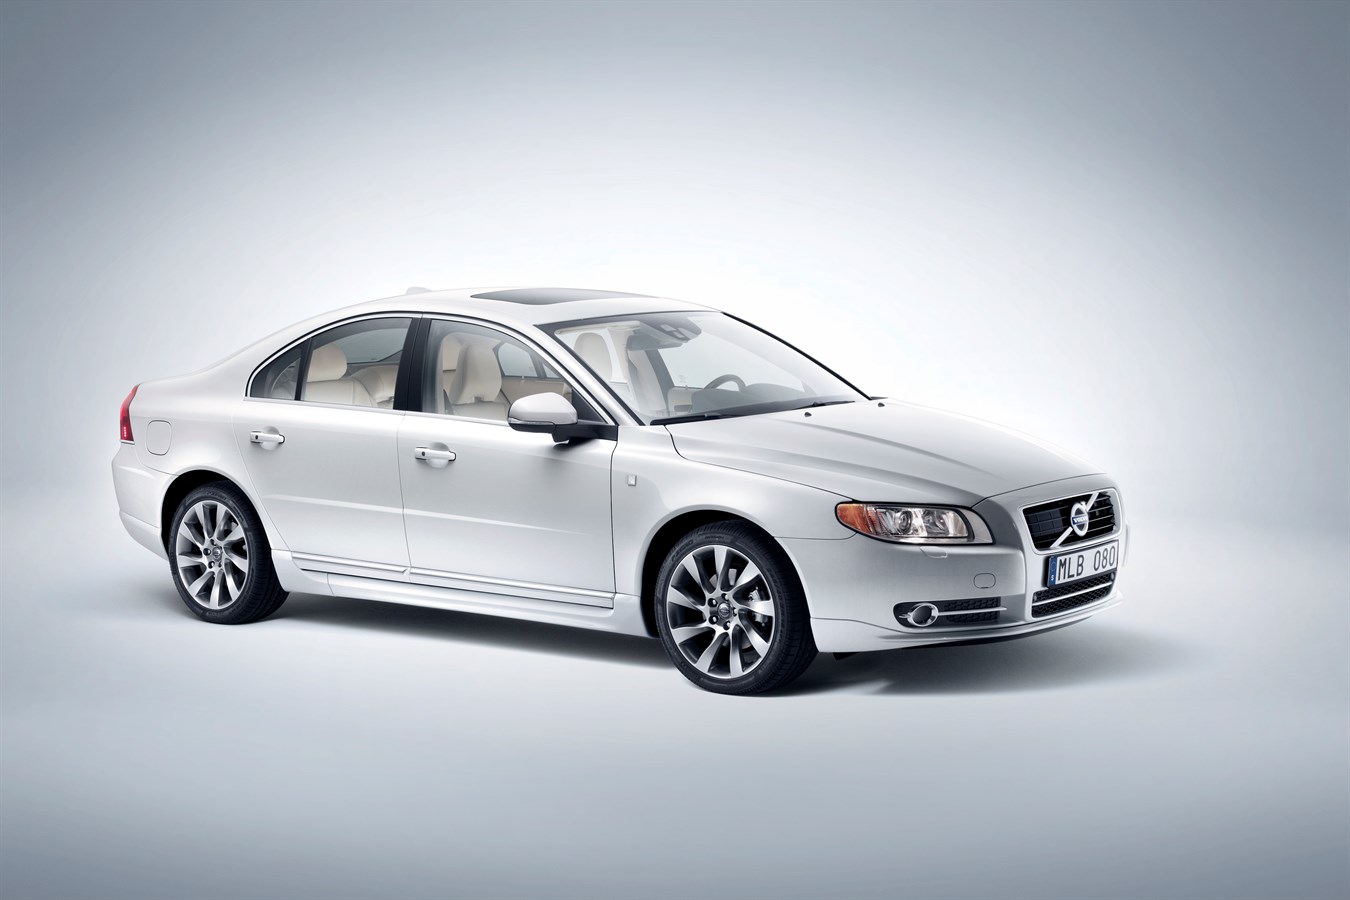 Volvos to transport guests of honour to Princess Estelle’s christening